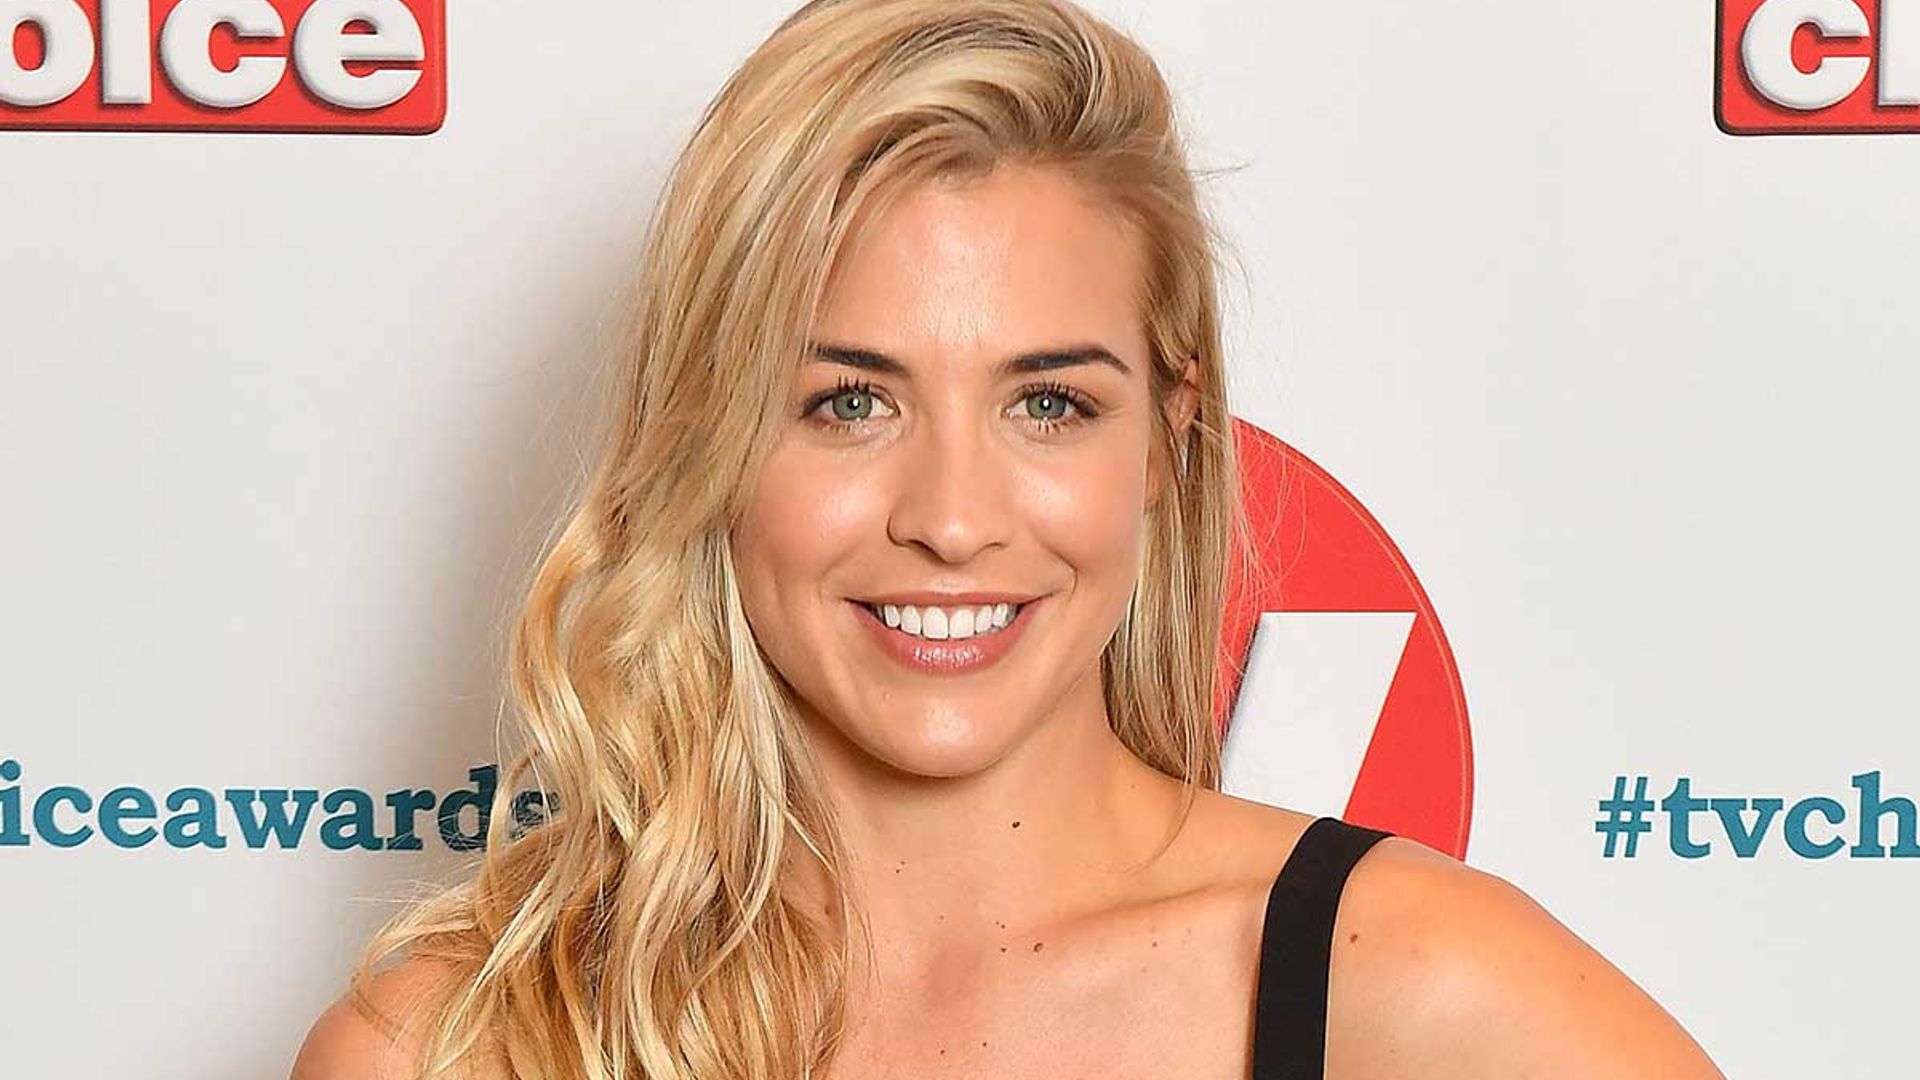 Gemma Atkinson shows off gorgeous post-lockdown makeover - see Gorka Marquez's hilarious reaction